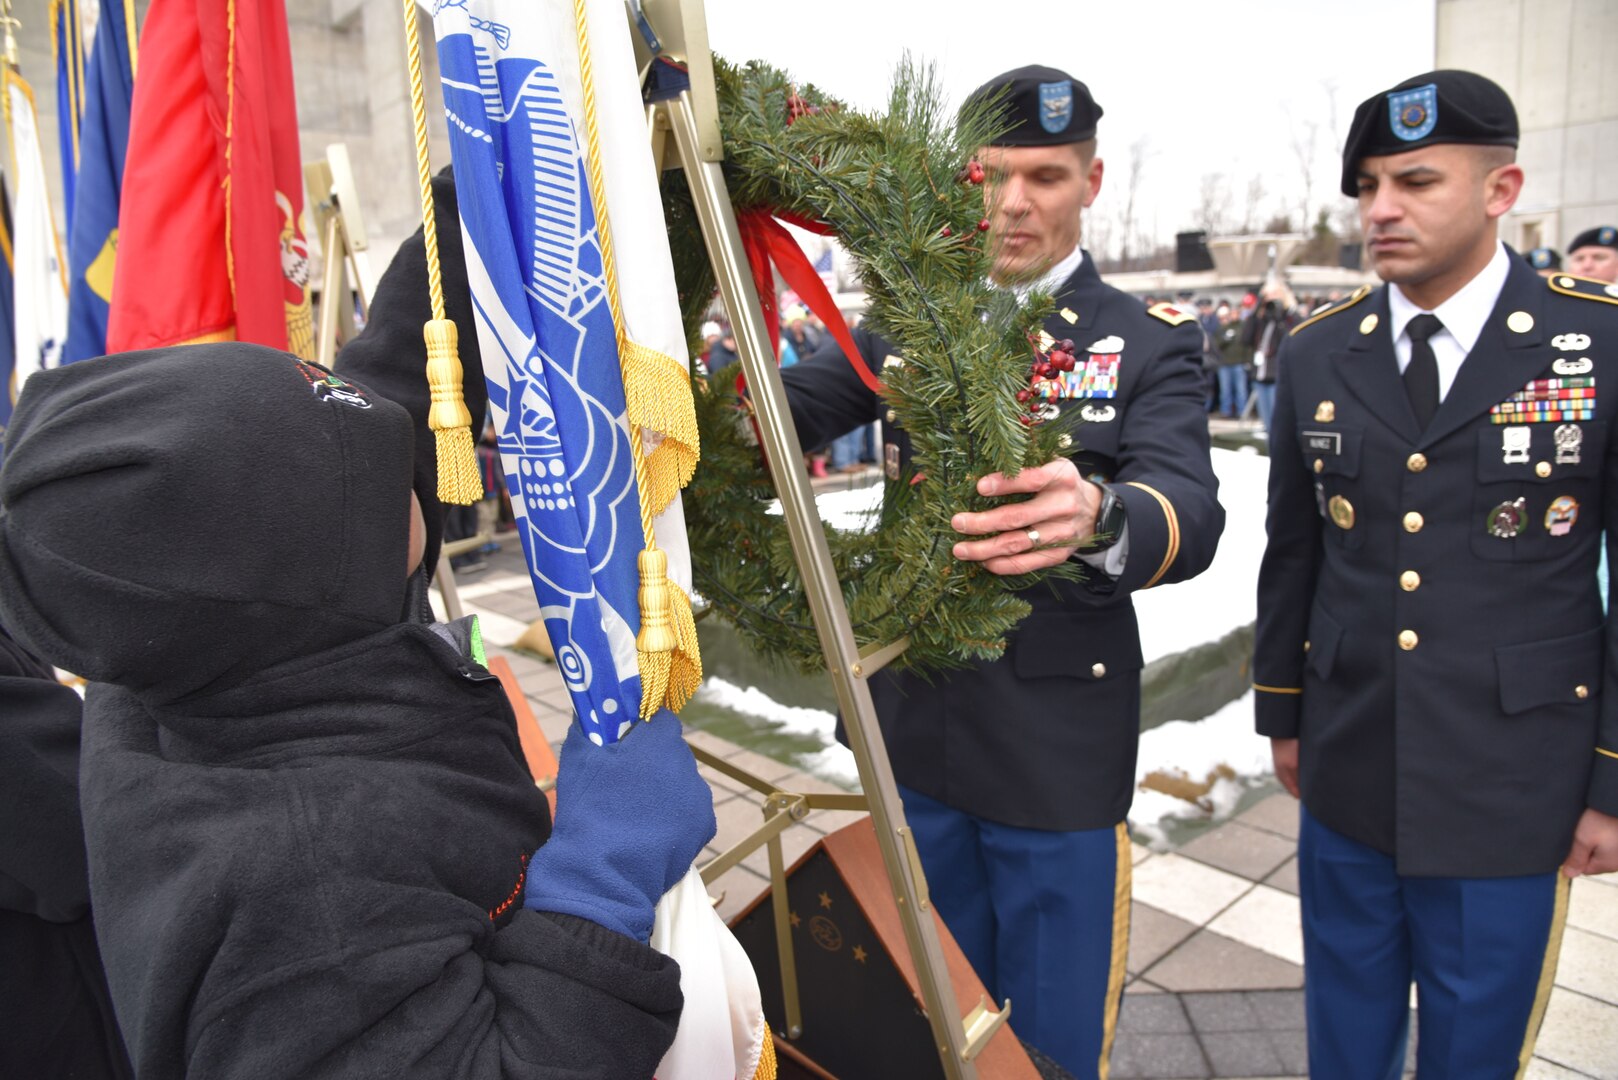 DLA Distribution personnel participate in Wreaths Across America Ceremony